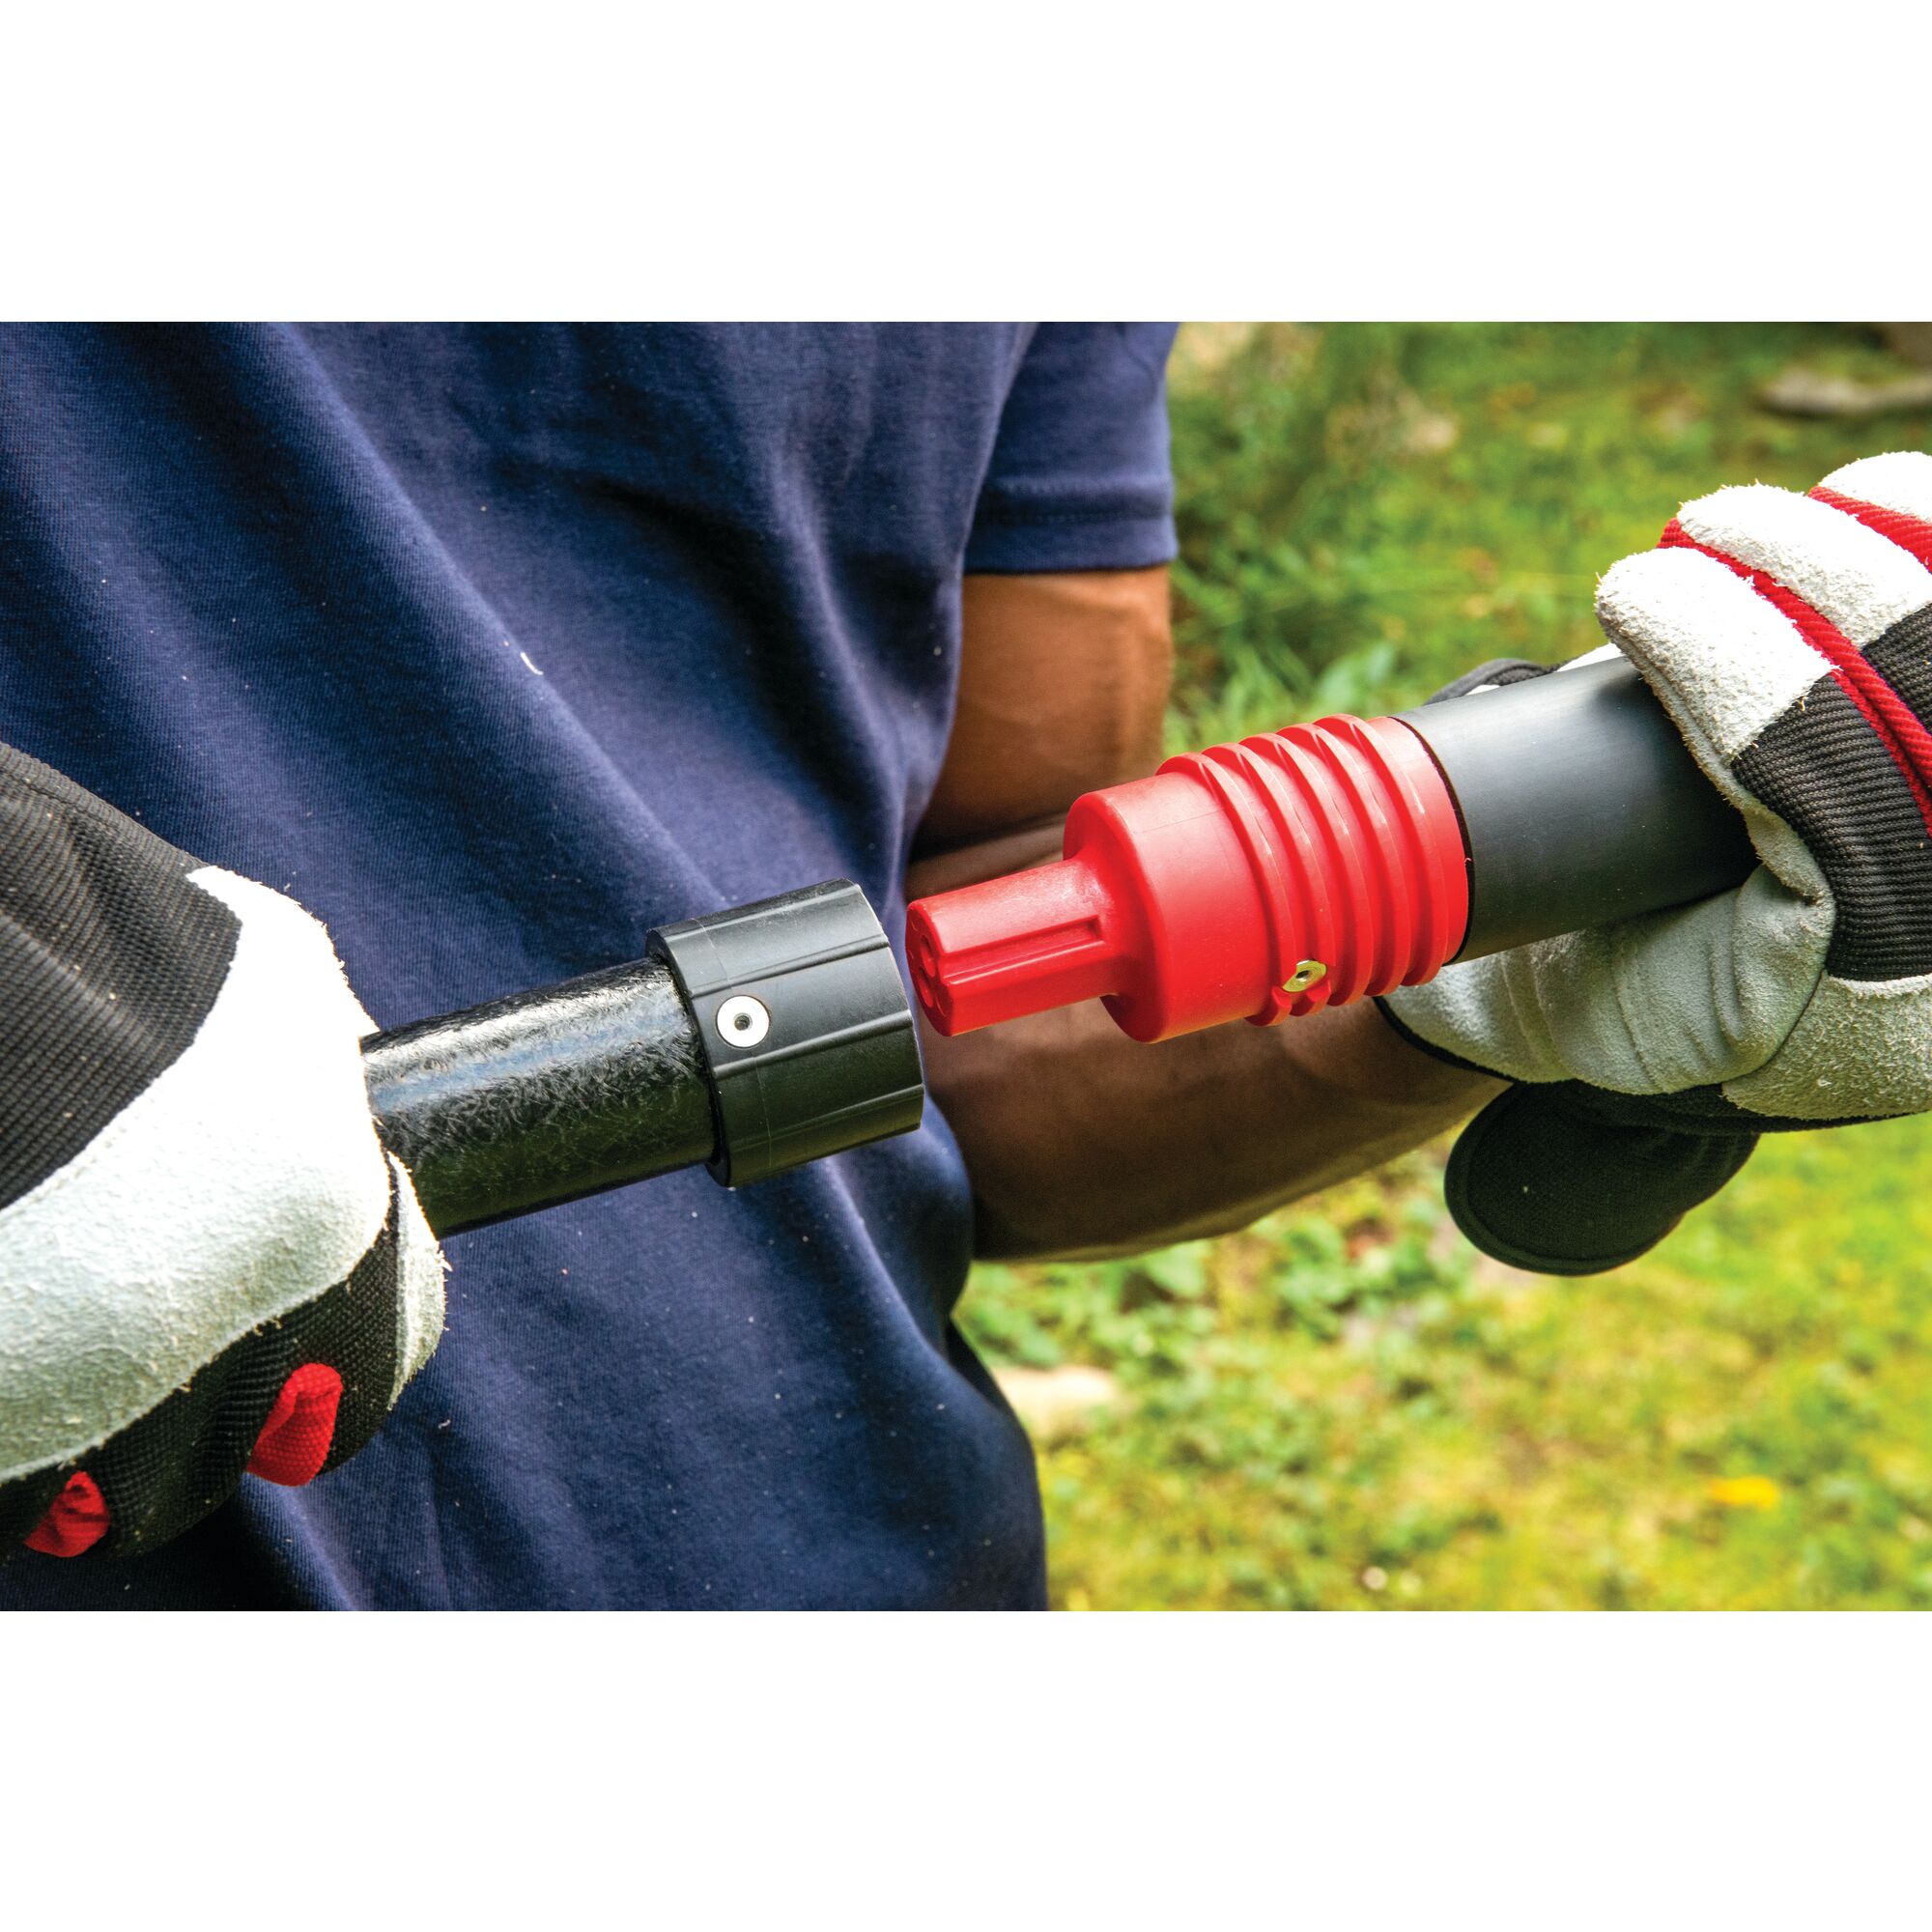 Up to 14 foot reach with extension pole feature of cordless pole chainsaw tool only.